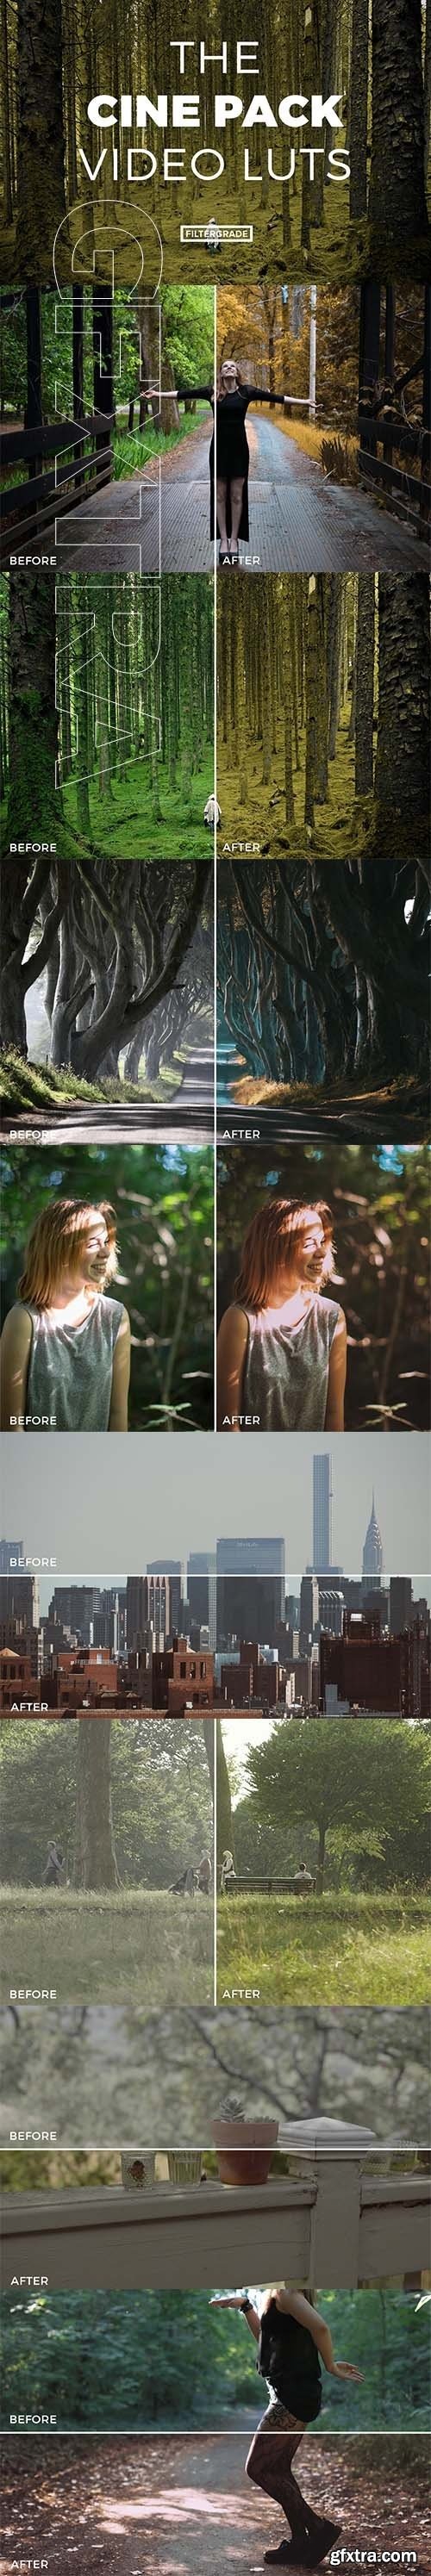 The Cine Pack Video LUTs